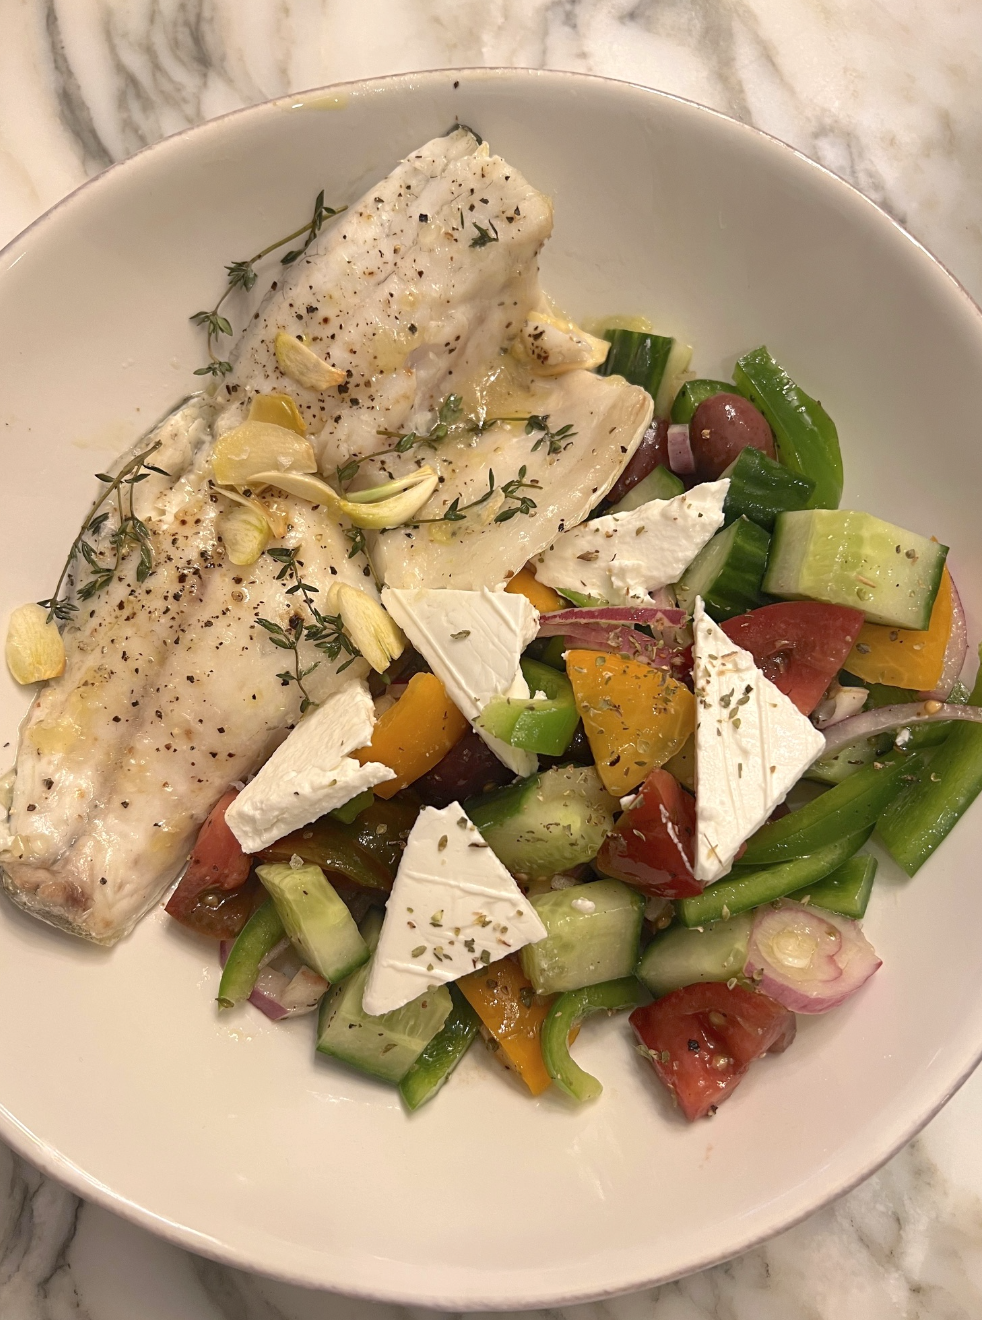 Plate with fish and Greek salad with feta cheese, olives, cucumber, onion, and bell peppers